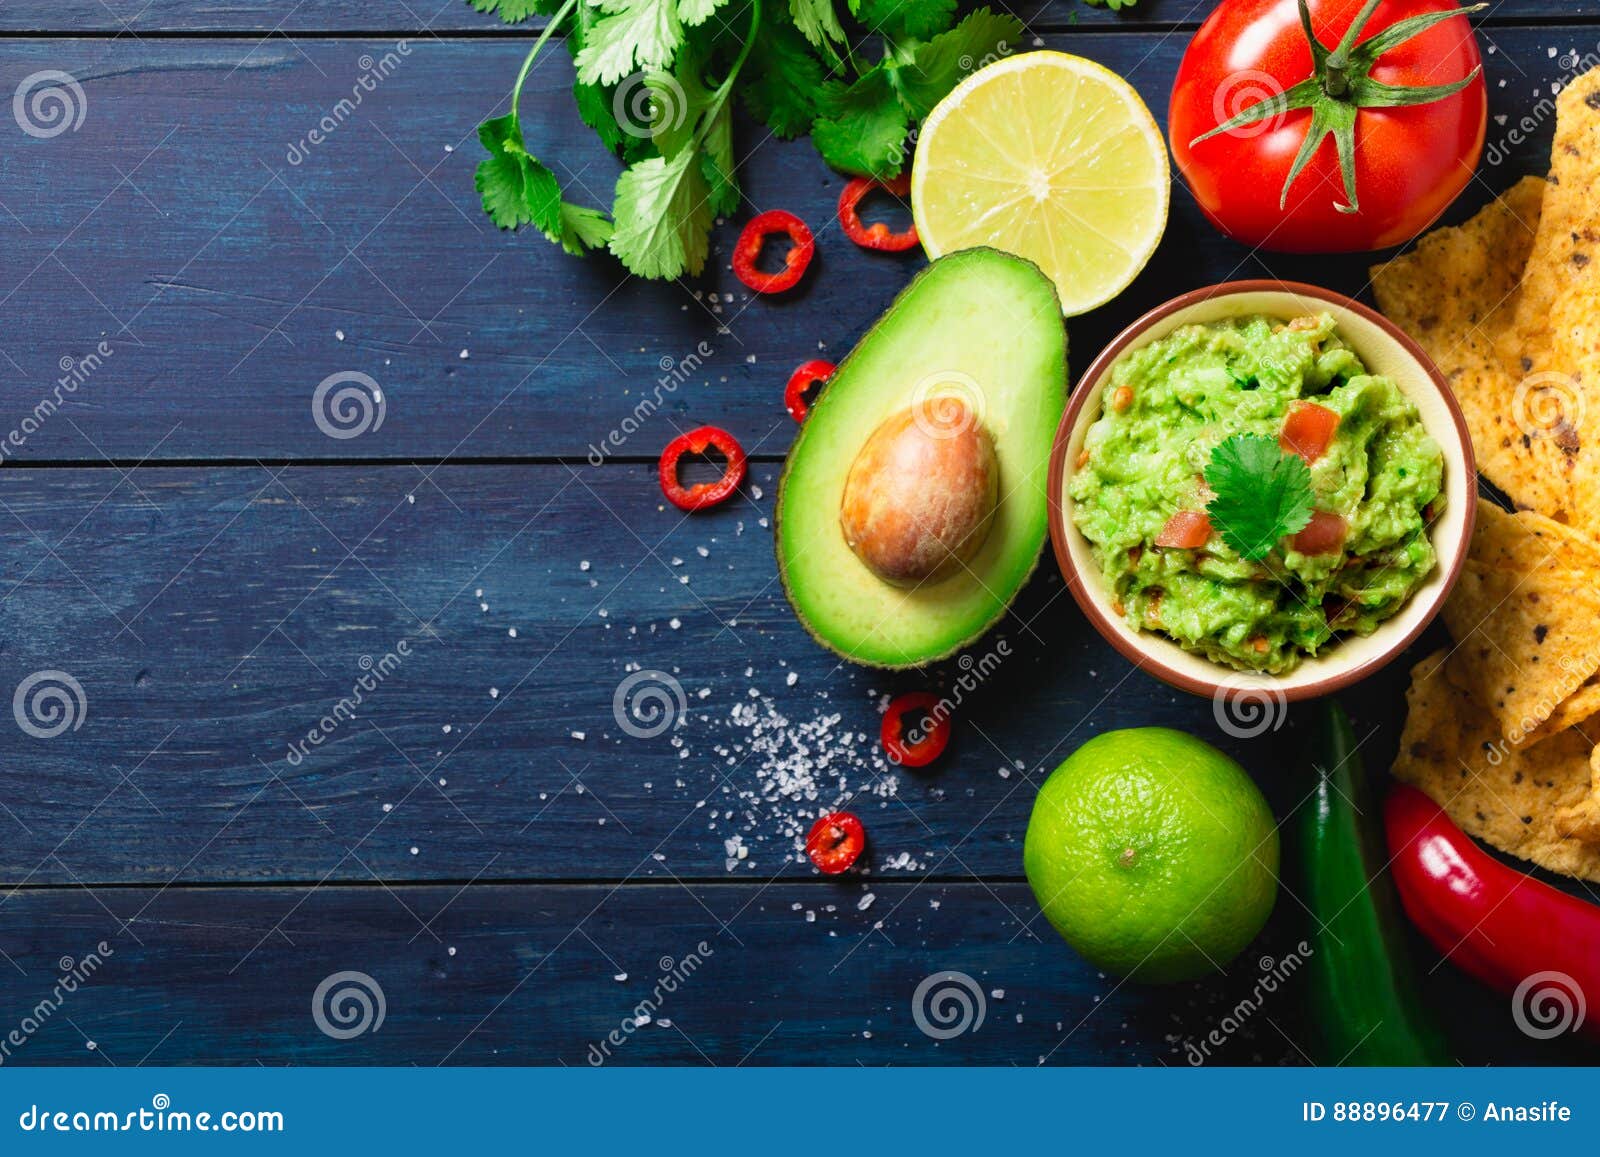 guacamole bowl with ingredients